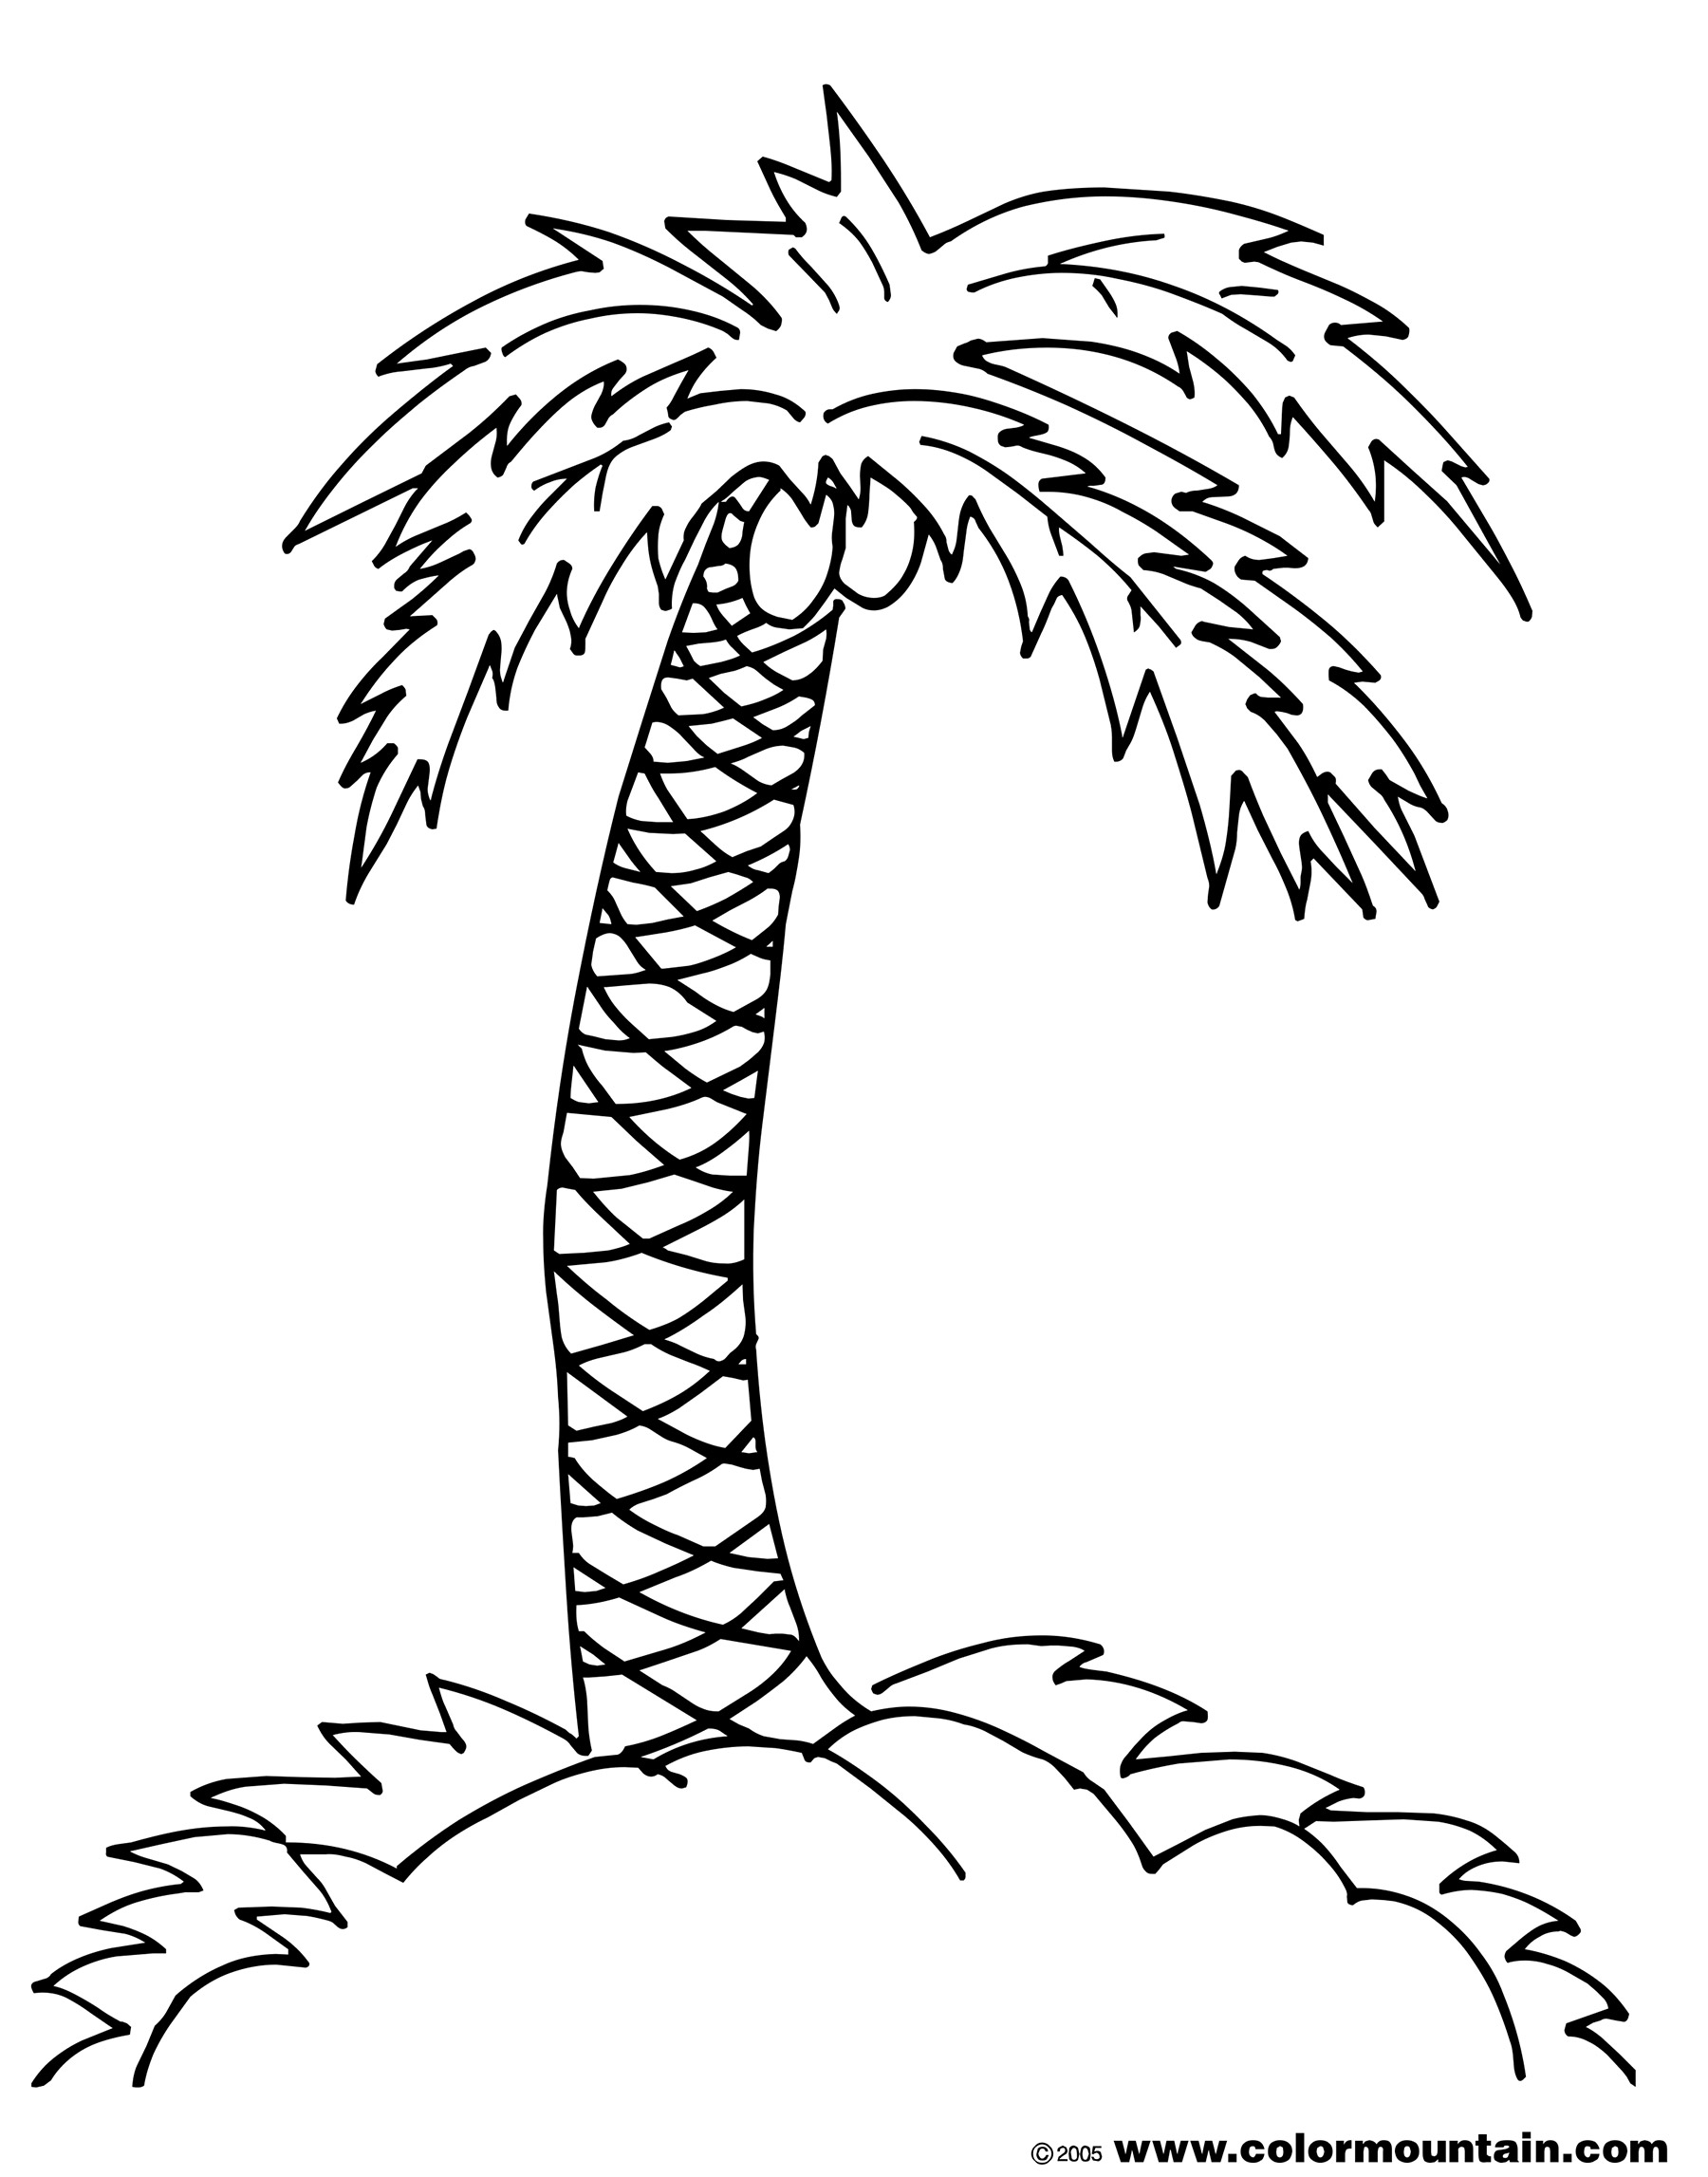 coconut tree coloring page